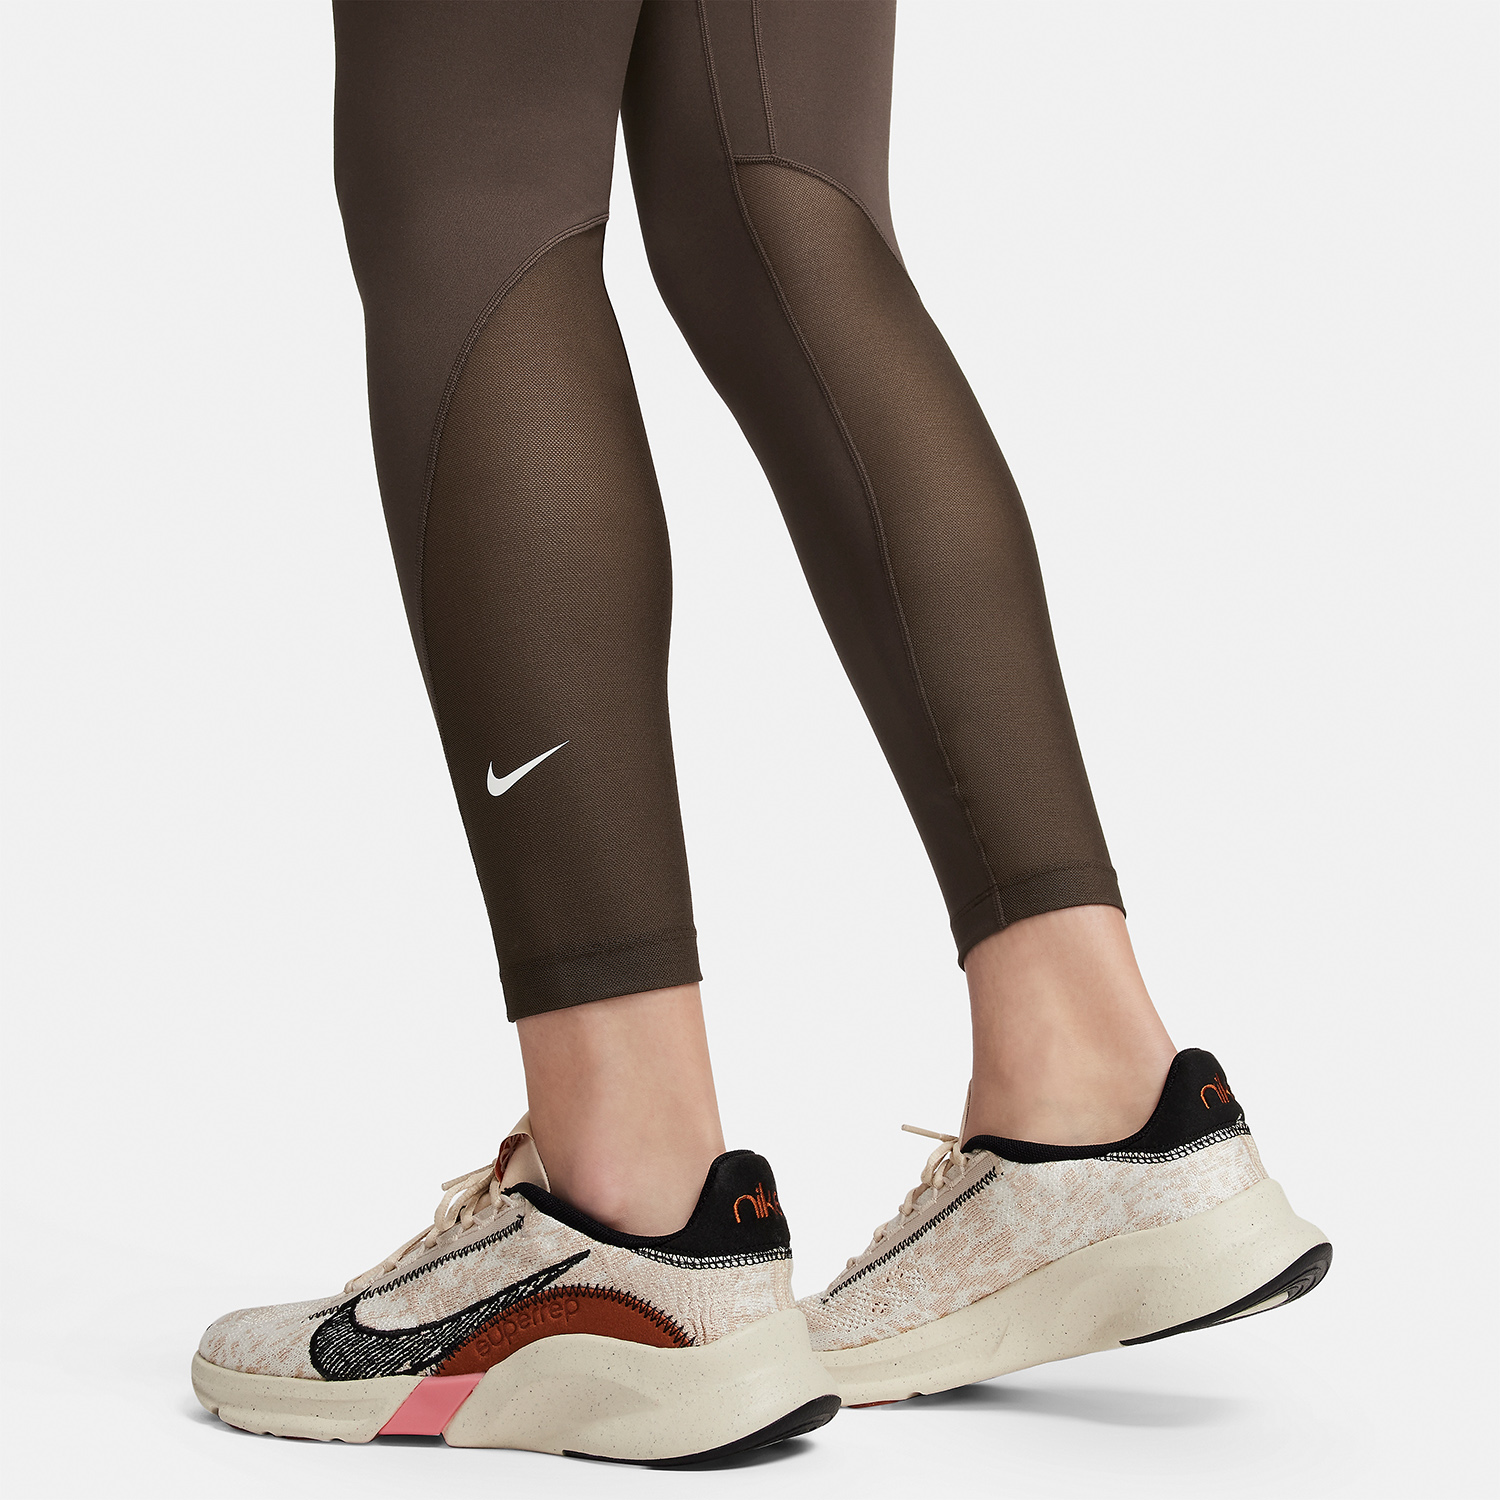 NIKE SPEED ICON Tights 7/8 Running Gym - Size Small - Black